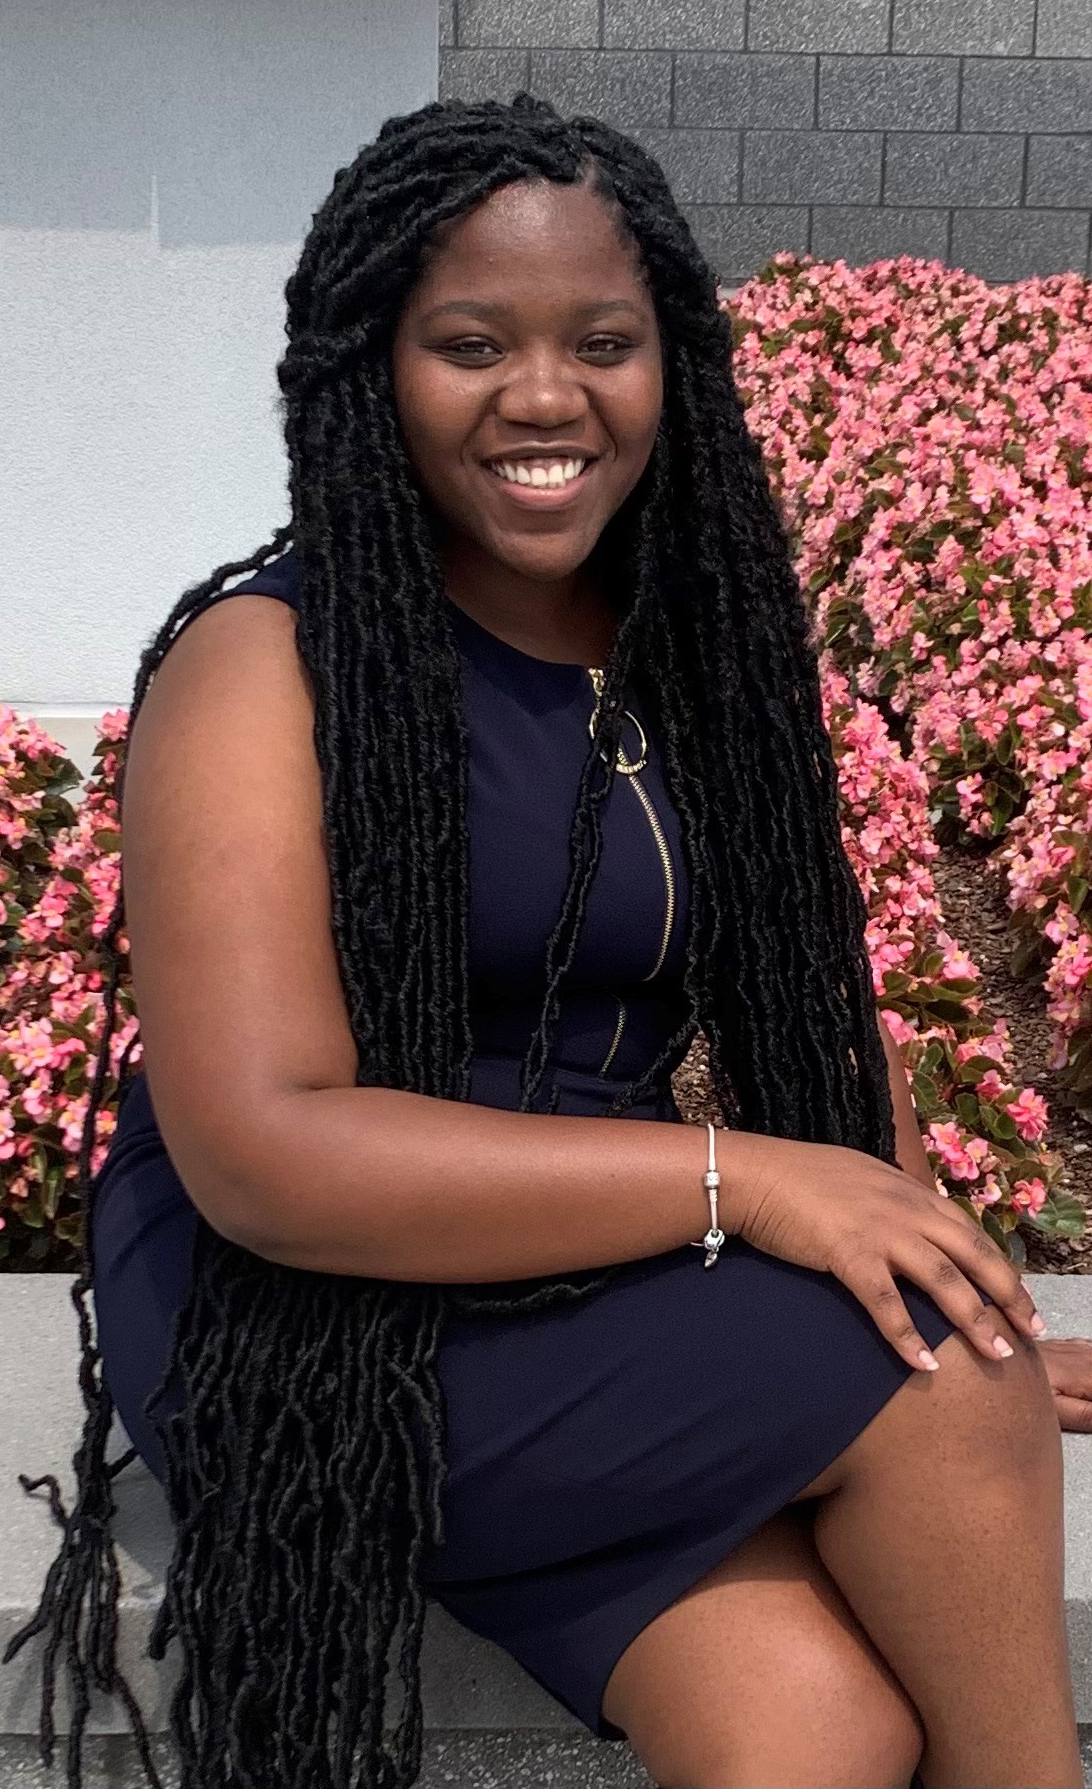 Rabria Moore, a senior from Durant, is part of the latest cohort for The New York Times Corps, a talent pipeline program for journalism students. Submitted photo